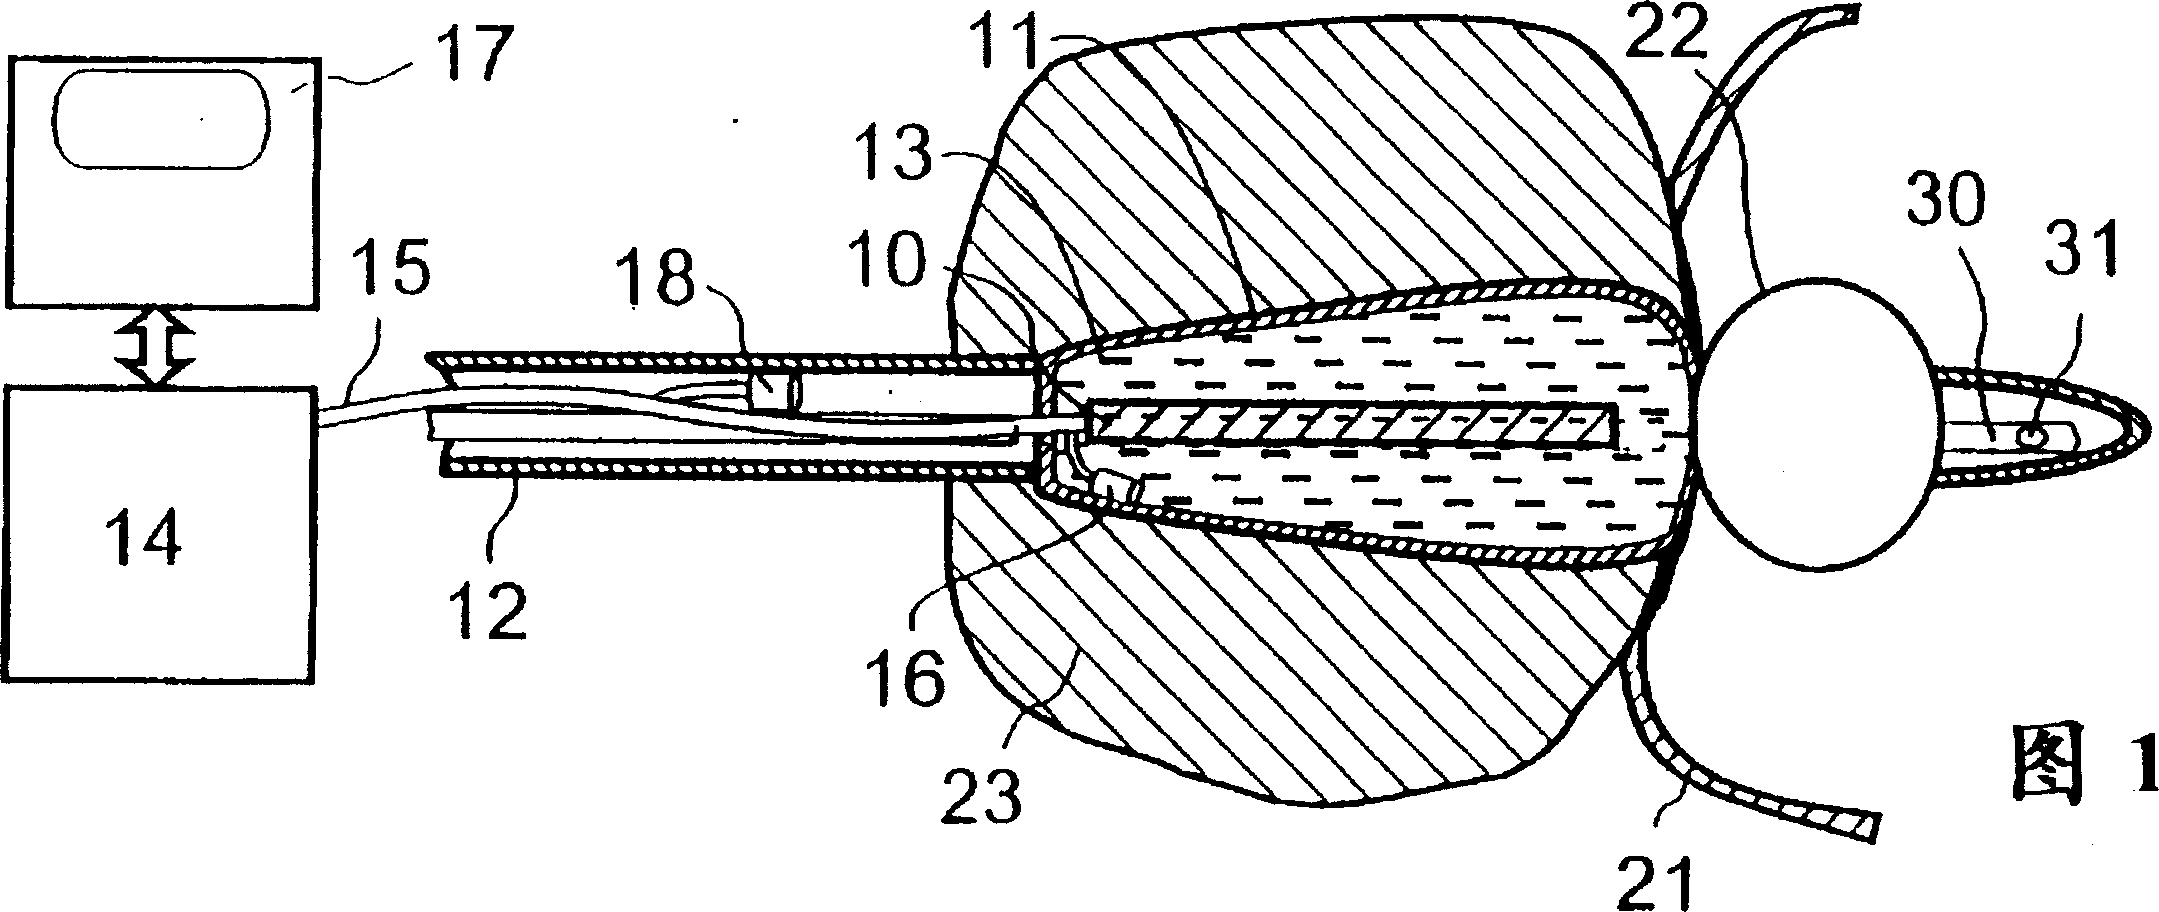 Device for local heat treatment of tissue